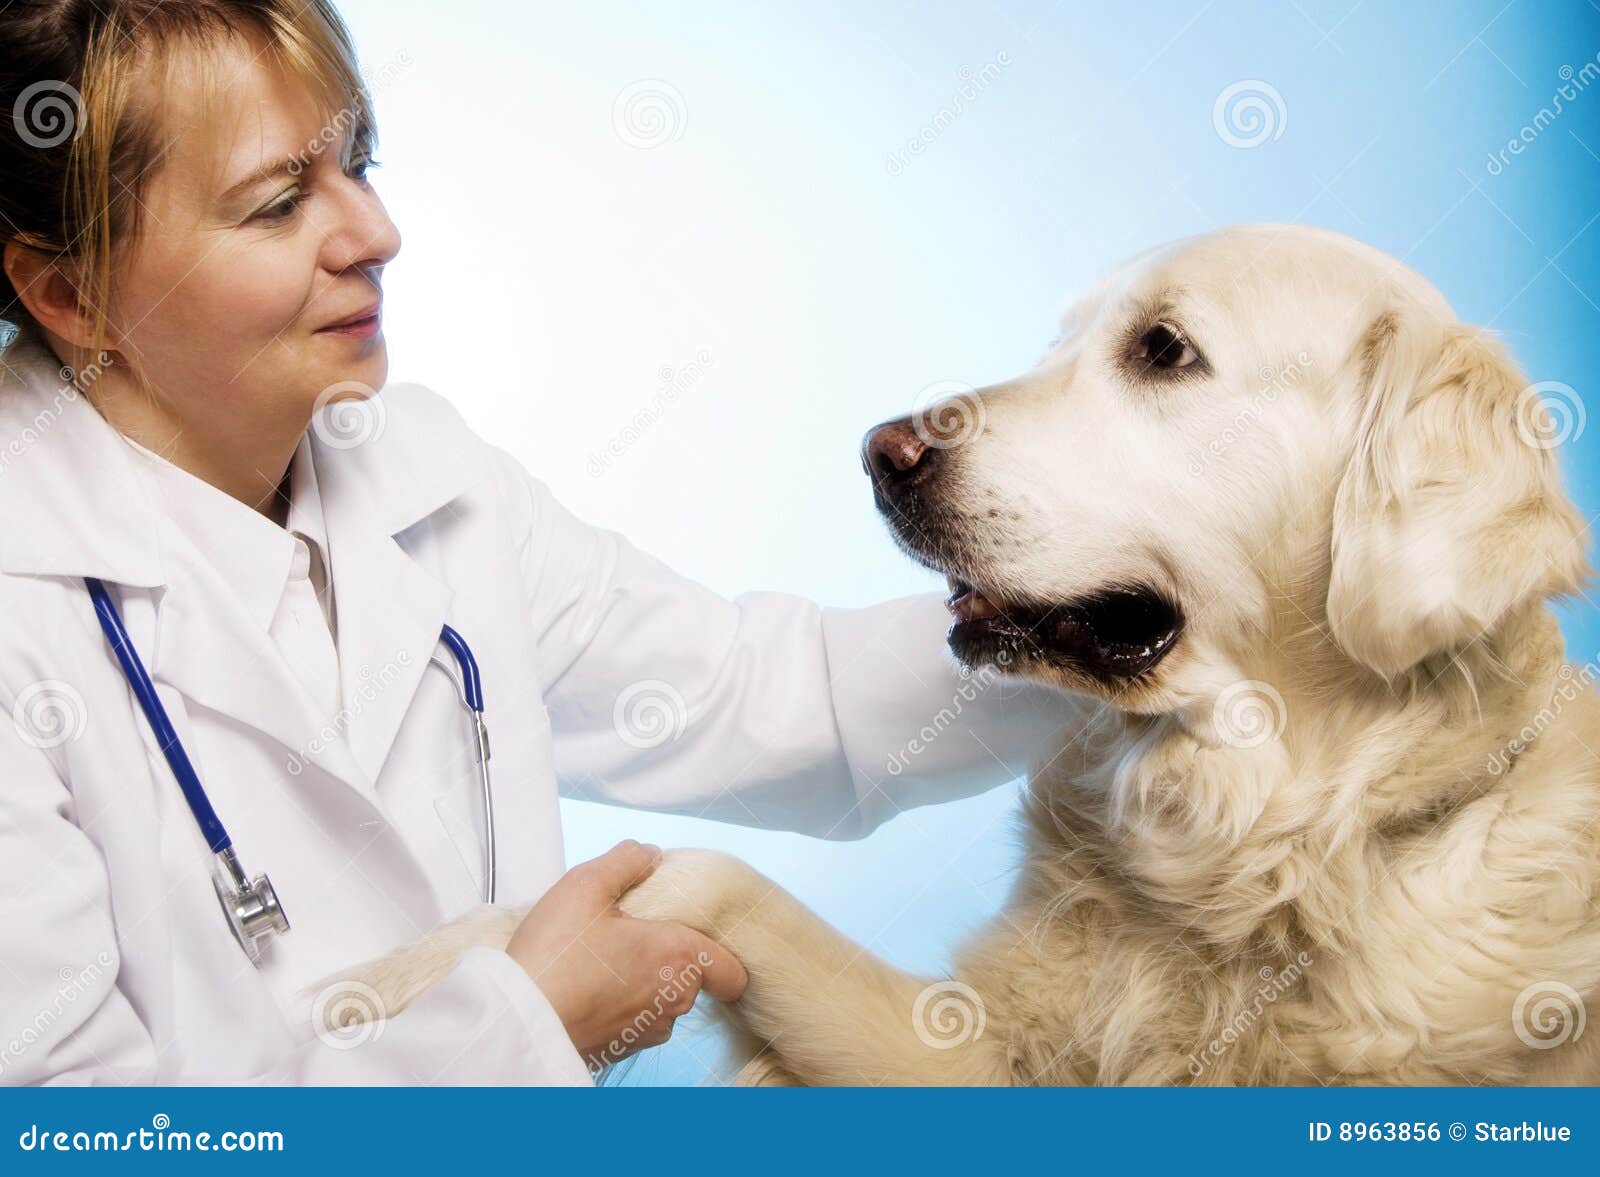 veterinarian doctor with dog